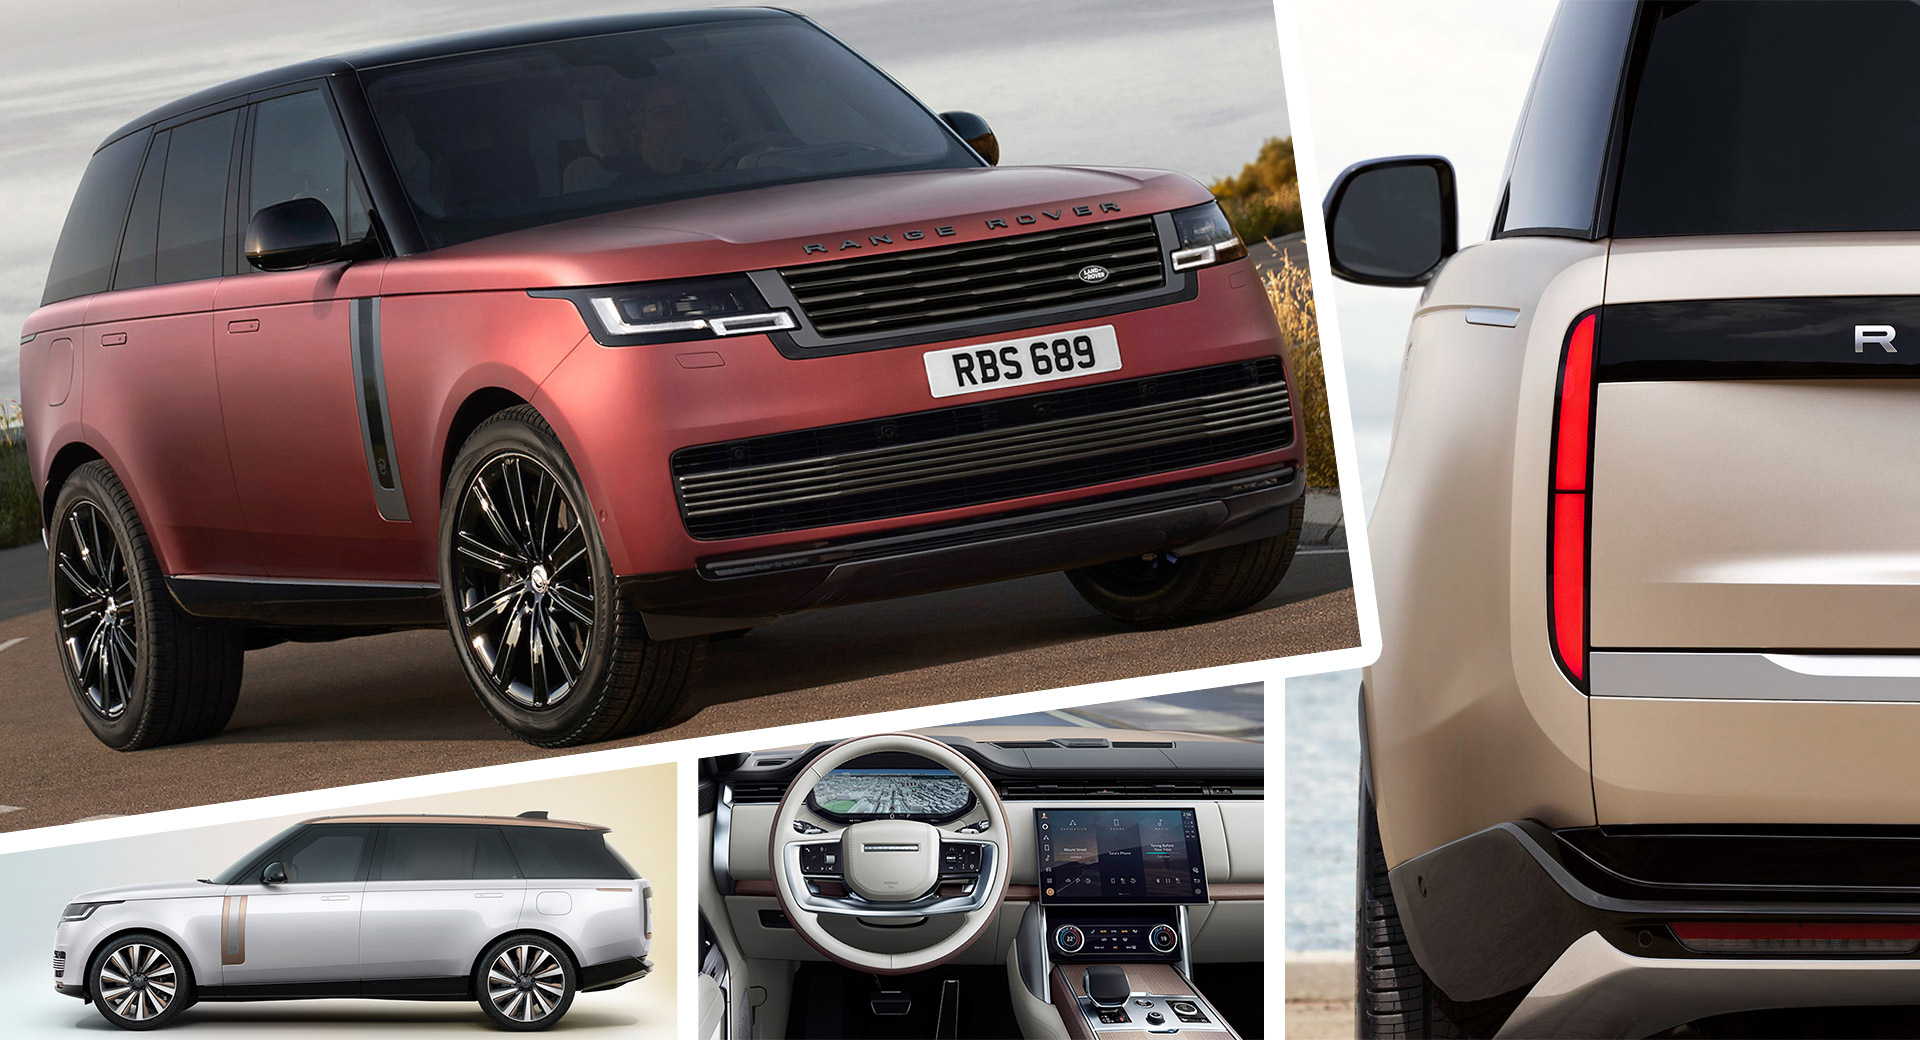 2022 Range Rover Lands With BMW V8 And Noise-Cancelling Headrests